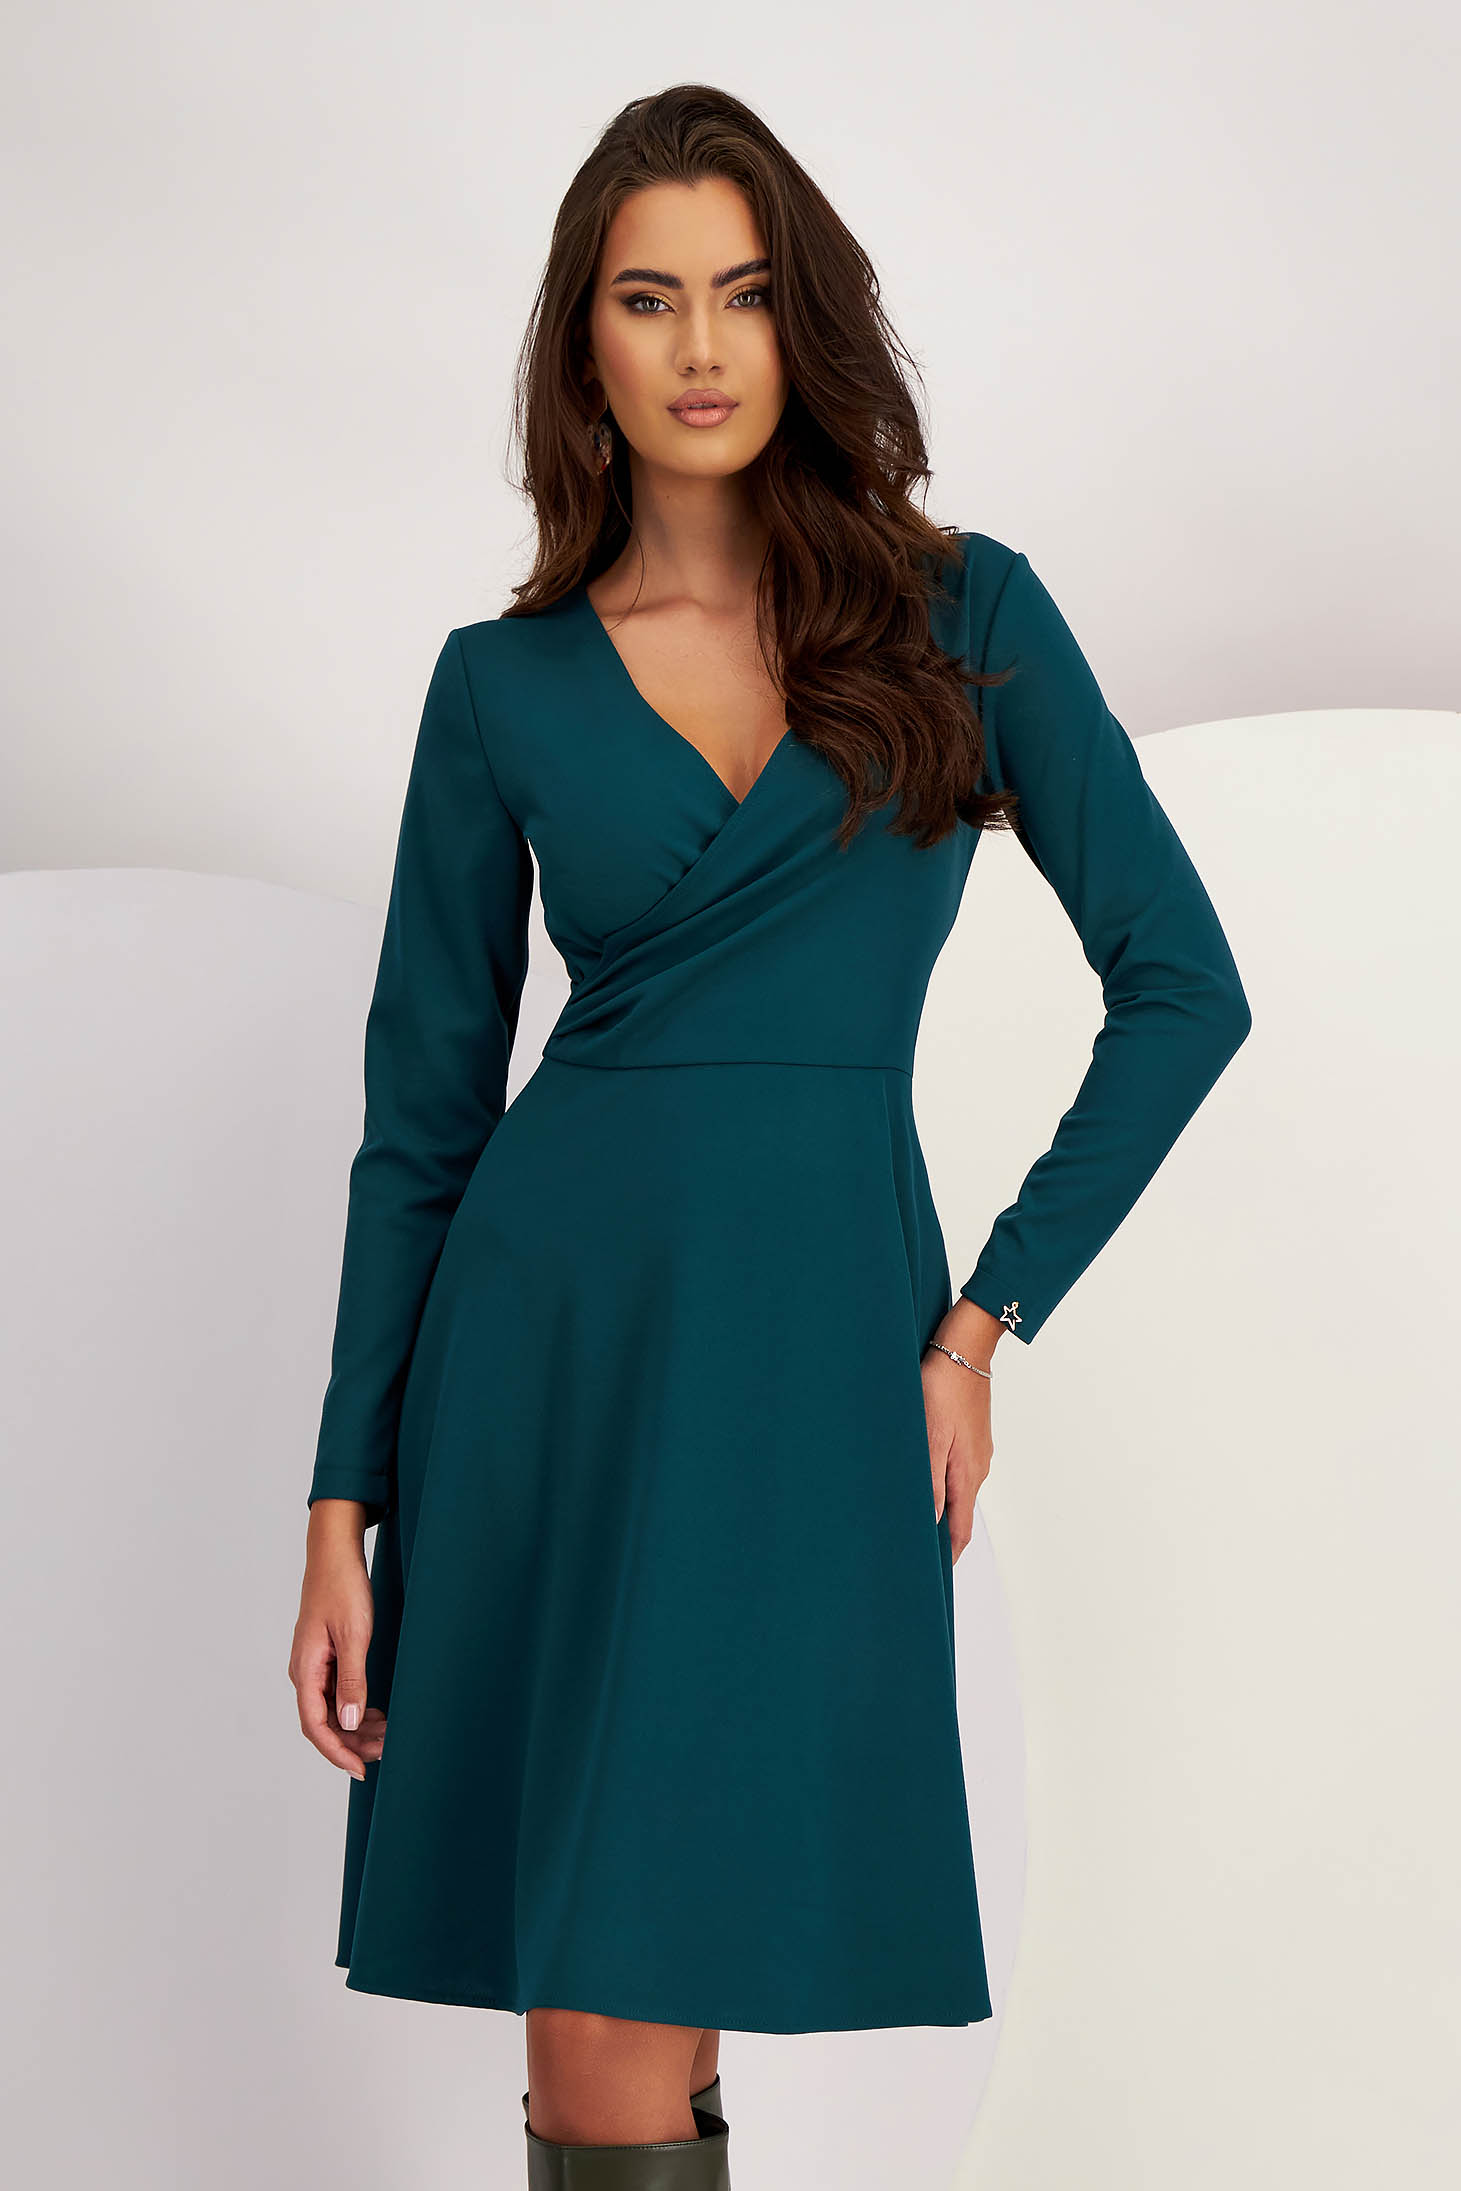 Dark Green Crepe Knee-Length A-Line Dress with Crossover Neckline - StarShinerS